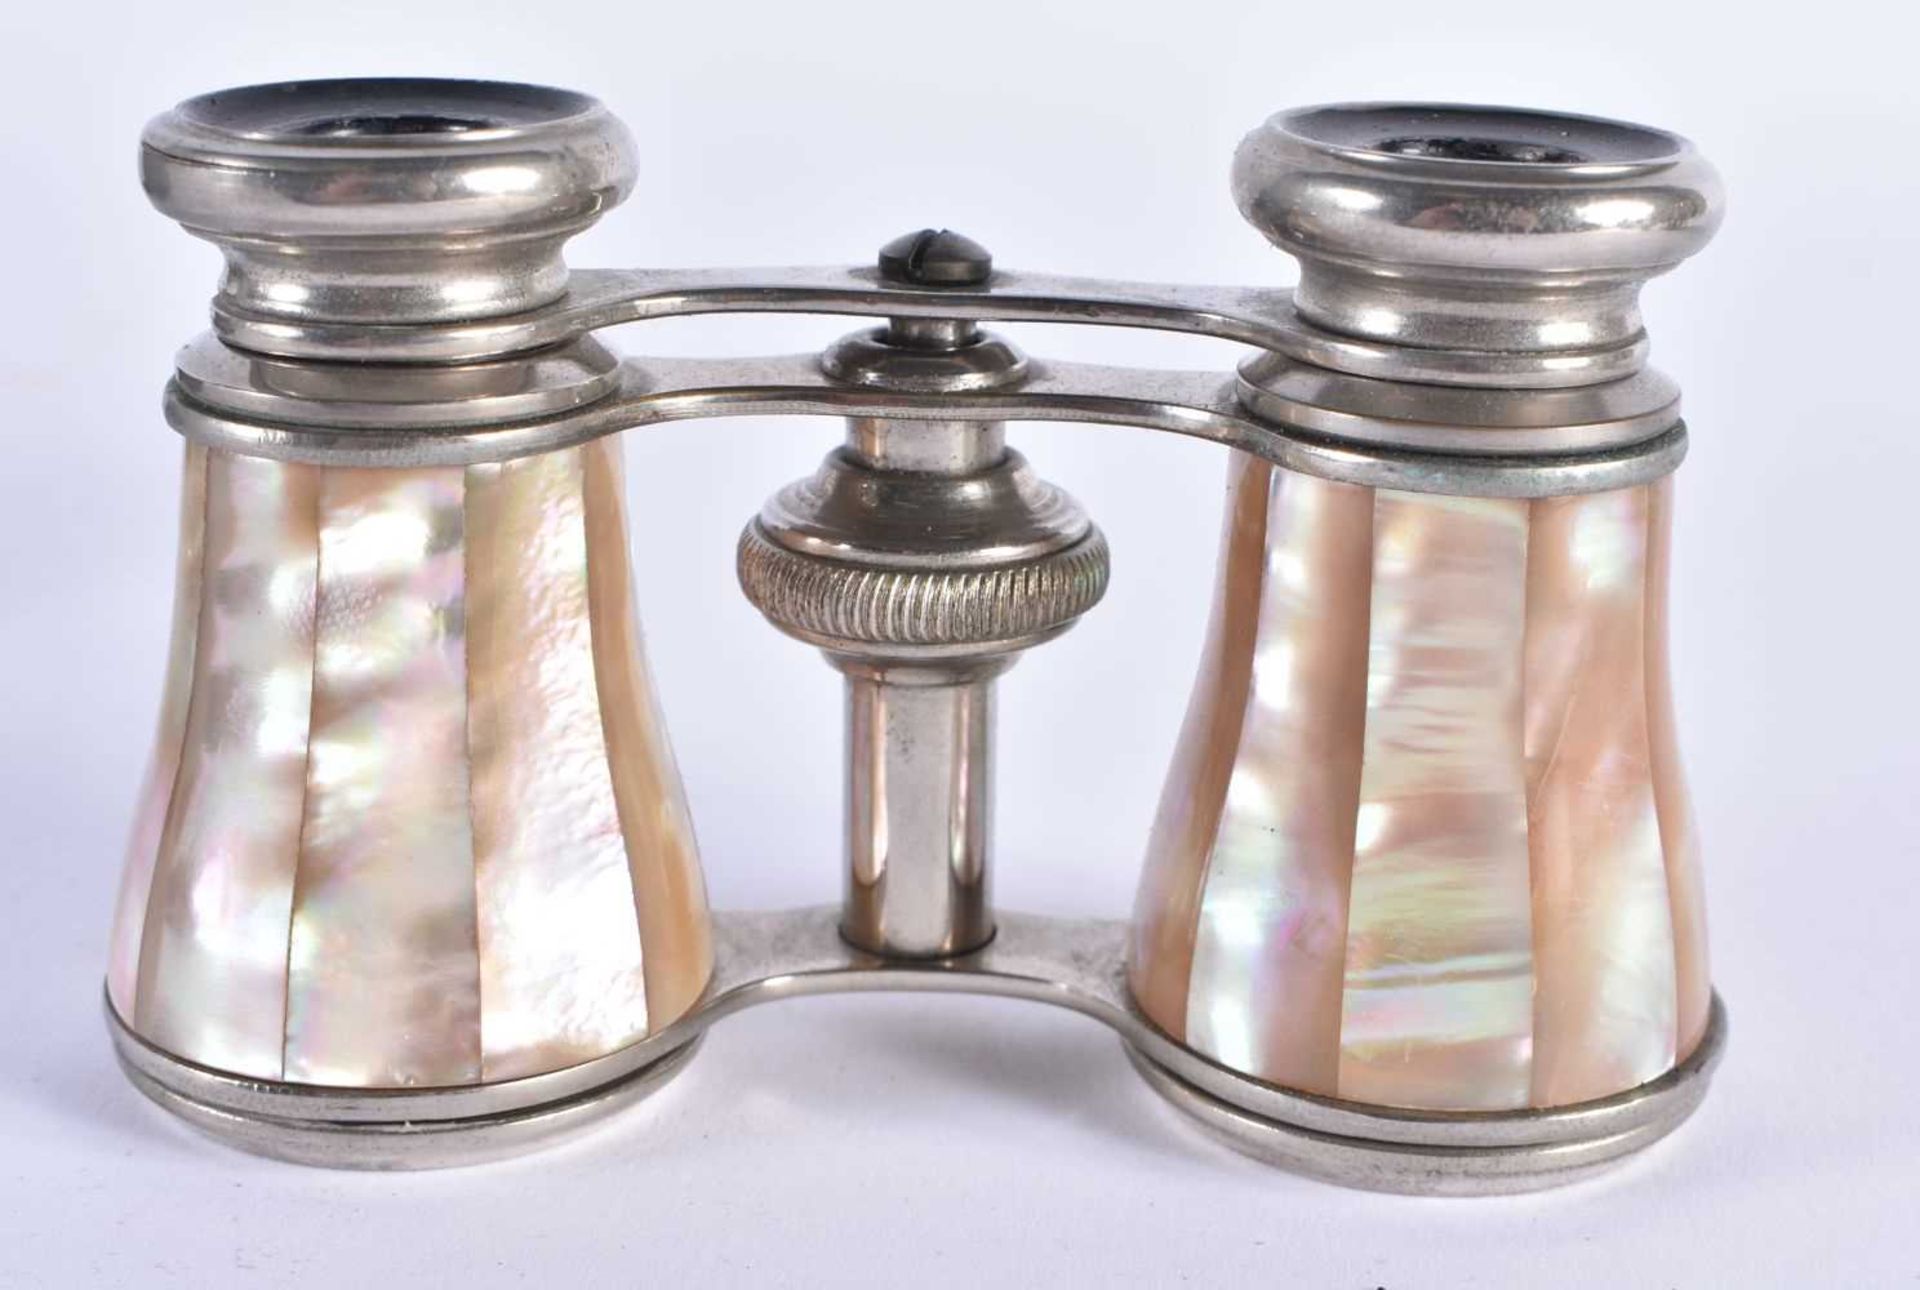 A PAIR OF MOTHER OF PEARL OPERA GLASSES. 9 cm x 8 cm extended. - Image 4 of 4